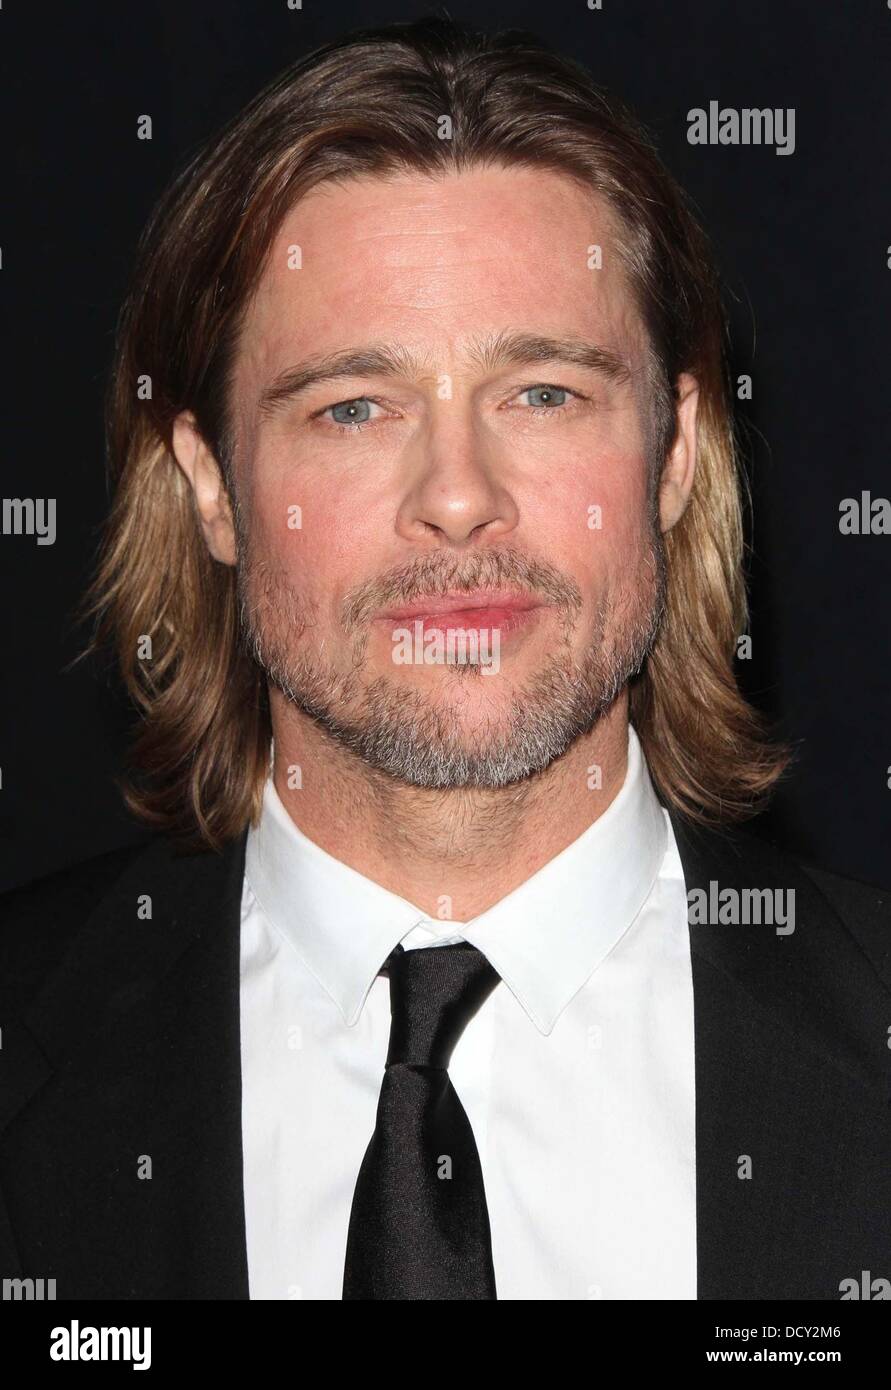 ***File Photo*** Academy Awards (Oscars) Best Actor Nominee   Brad Pitt The 23rd annual Palm Springs International Film Festival Awards Gala at The Palm Springs Convention Center - Press Room Los Angeles, California - 07.01.12 Stock Photo